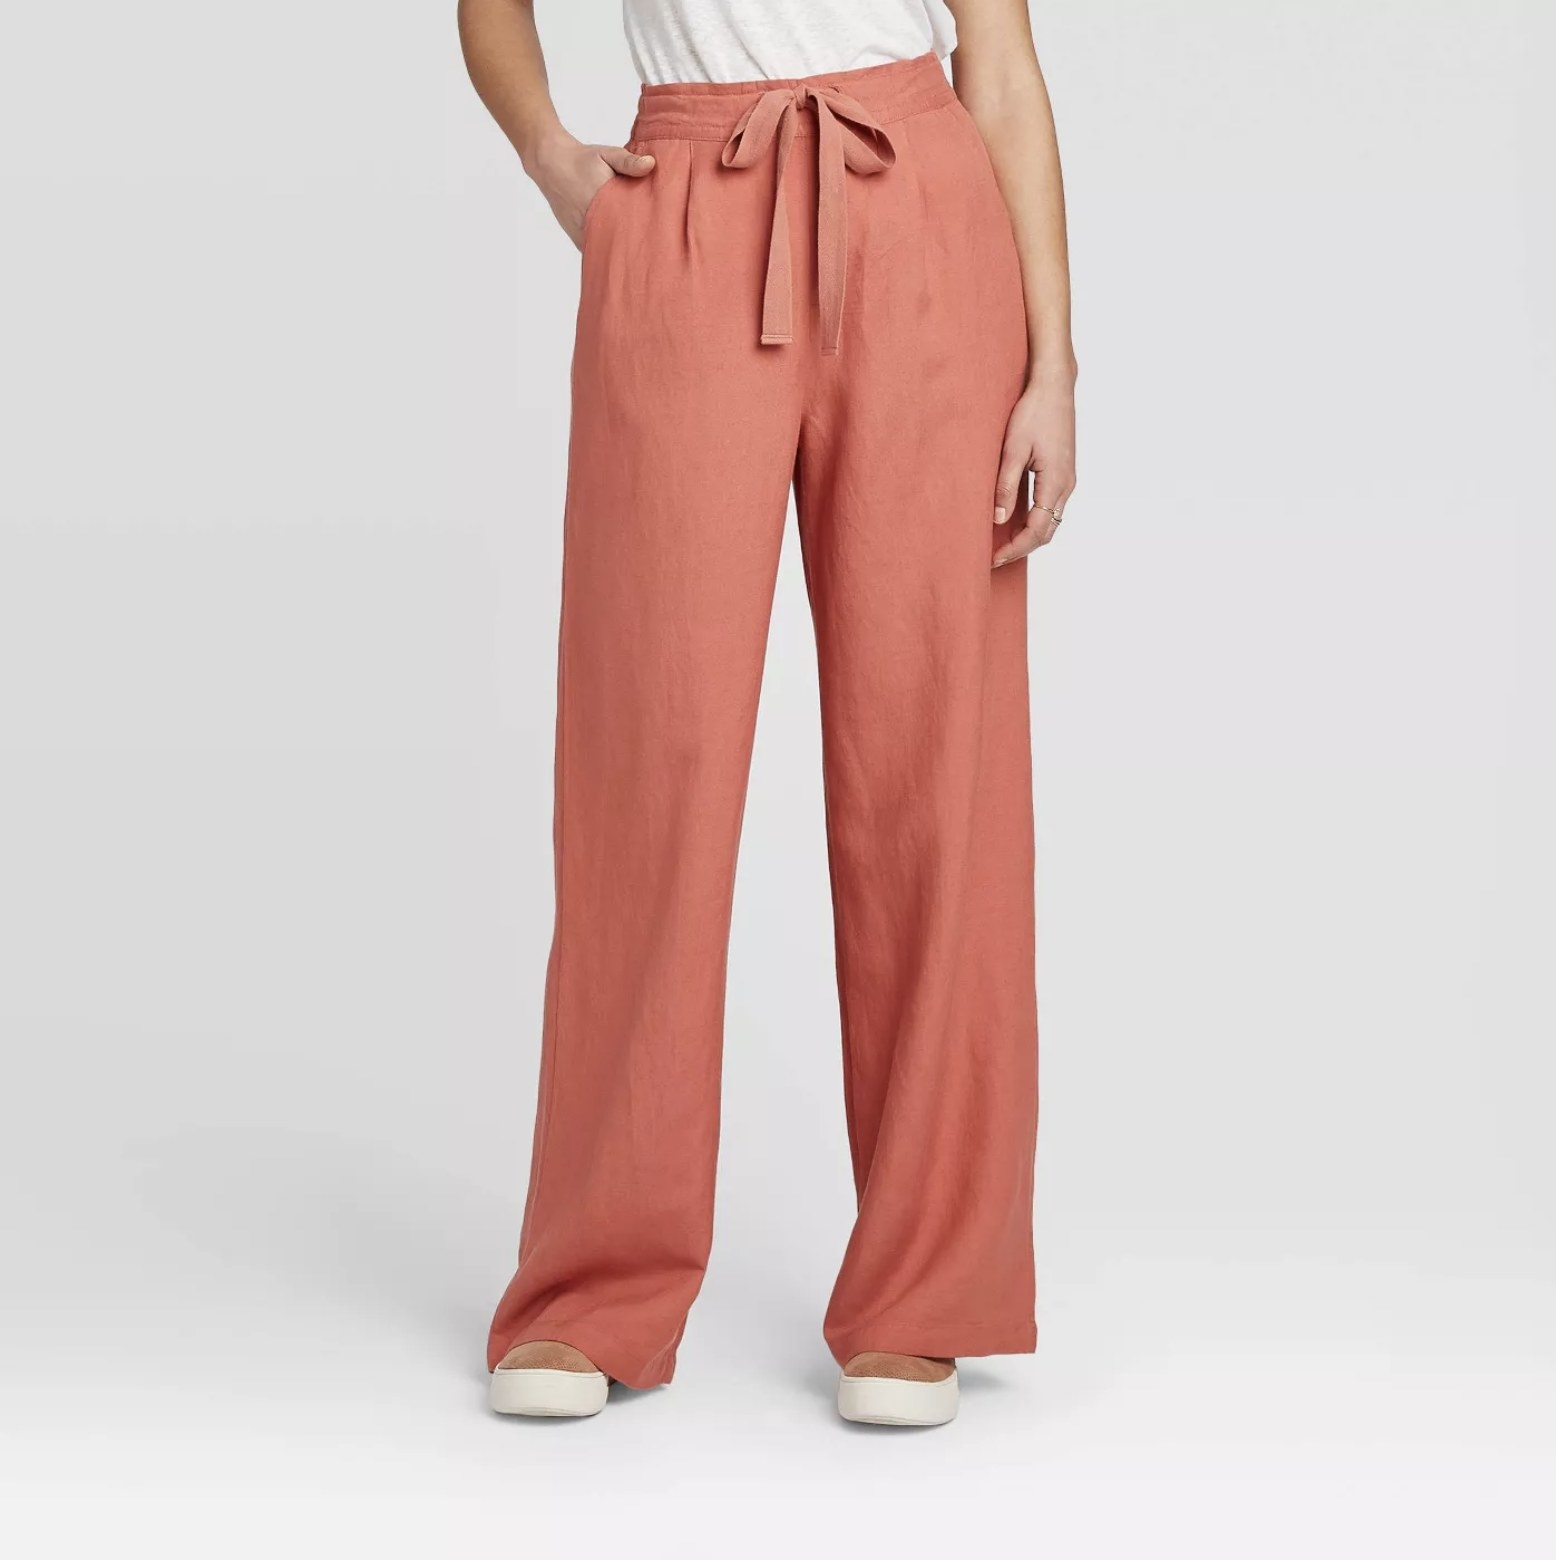 Model is wearing coral wide-leg linen pants with a tie front waist